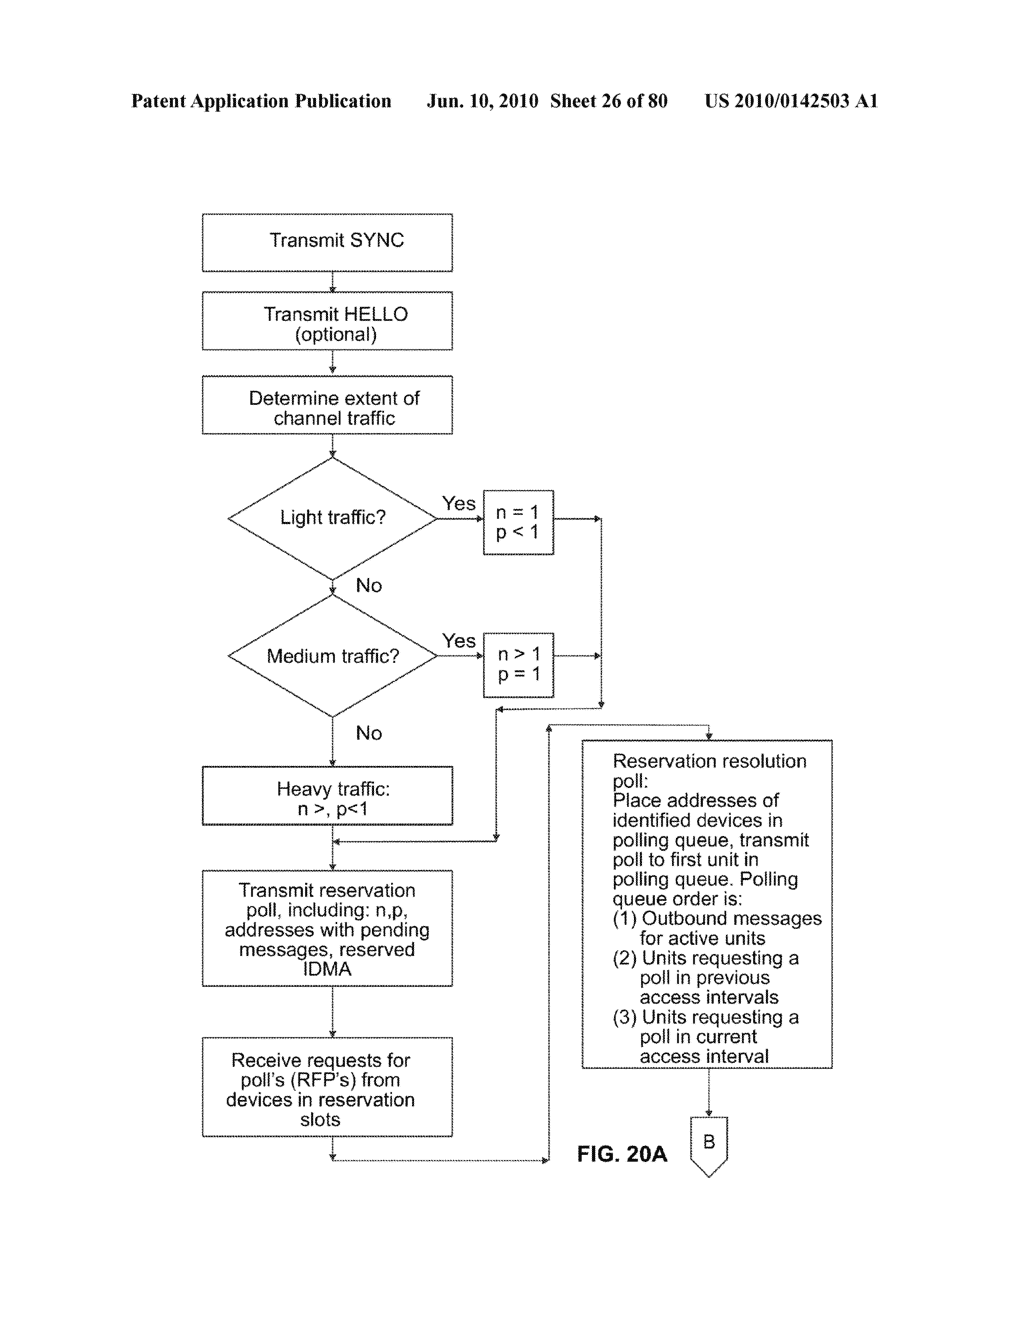 Hierarchical Data Collection Network Supporting Packetized Voice Communications Among Wireless Terminals And Telephones - diagram, schematic, and image 27